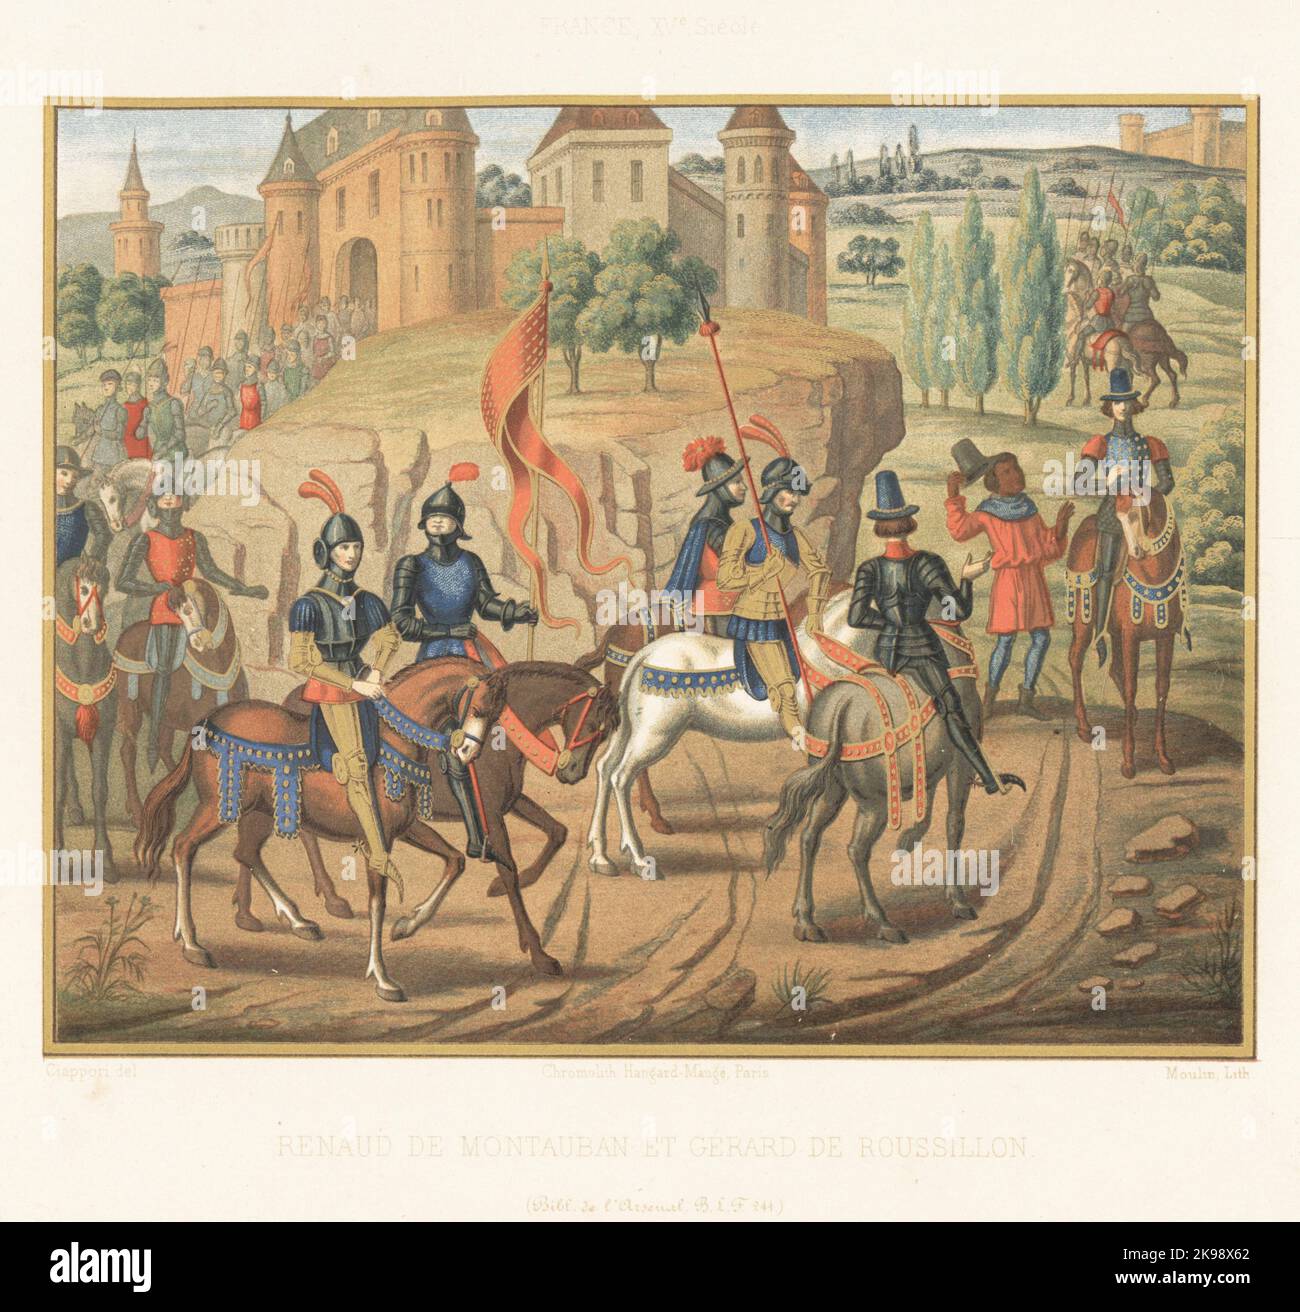 Renaud de Montauban and his family in a cavalcade meeting the knight Gerard de Roussillon. Gerard talks to a Black servant on the road in front of a fortress. France, 15th century. Taken from a manuscript romance, Folio 71, Tome IV, MS BLF 244, Bibliotheque de l'Arsenal. Chromolithograph by Moulin after an illustration by Claudius Joseph Ciappori from Charles Louandre’s Les Arts Somptuaires, The Sumptuary Arts, Hangard-Mauge, Paris, 1858. Stock Photo